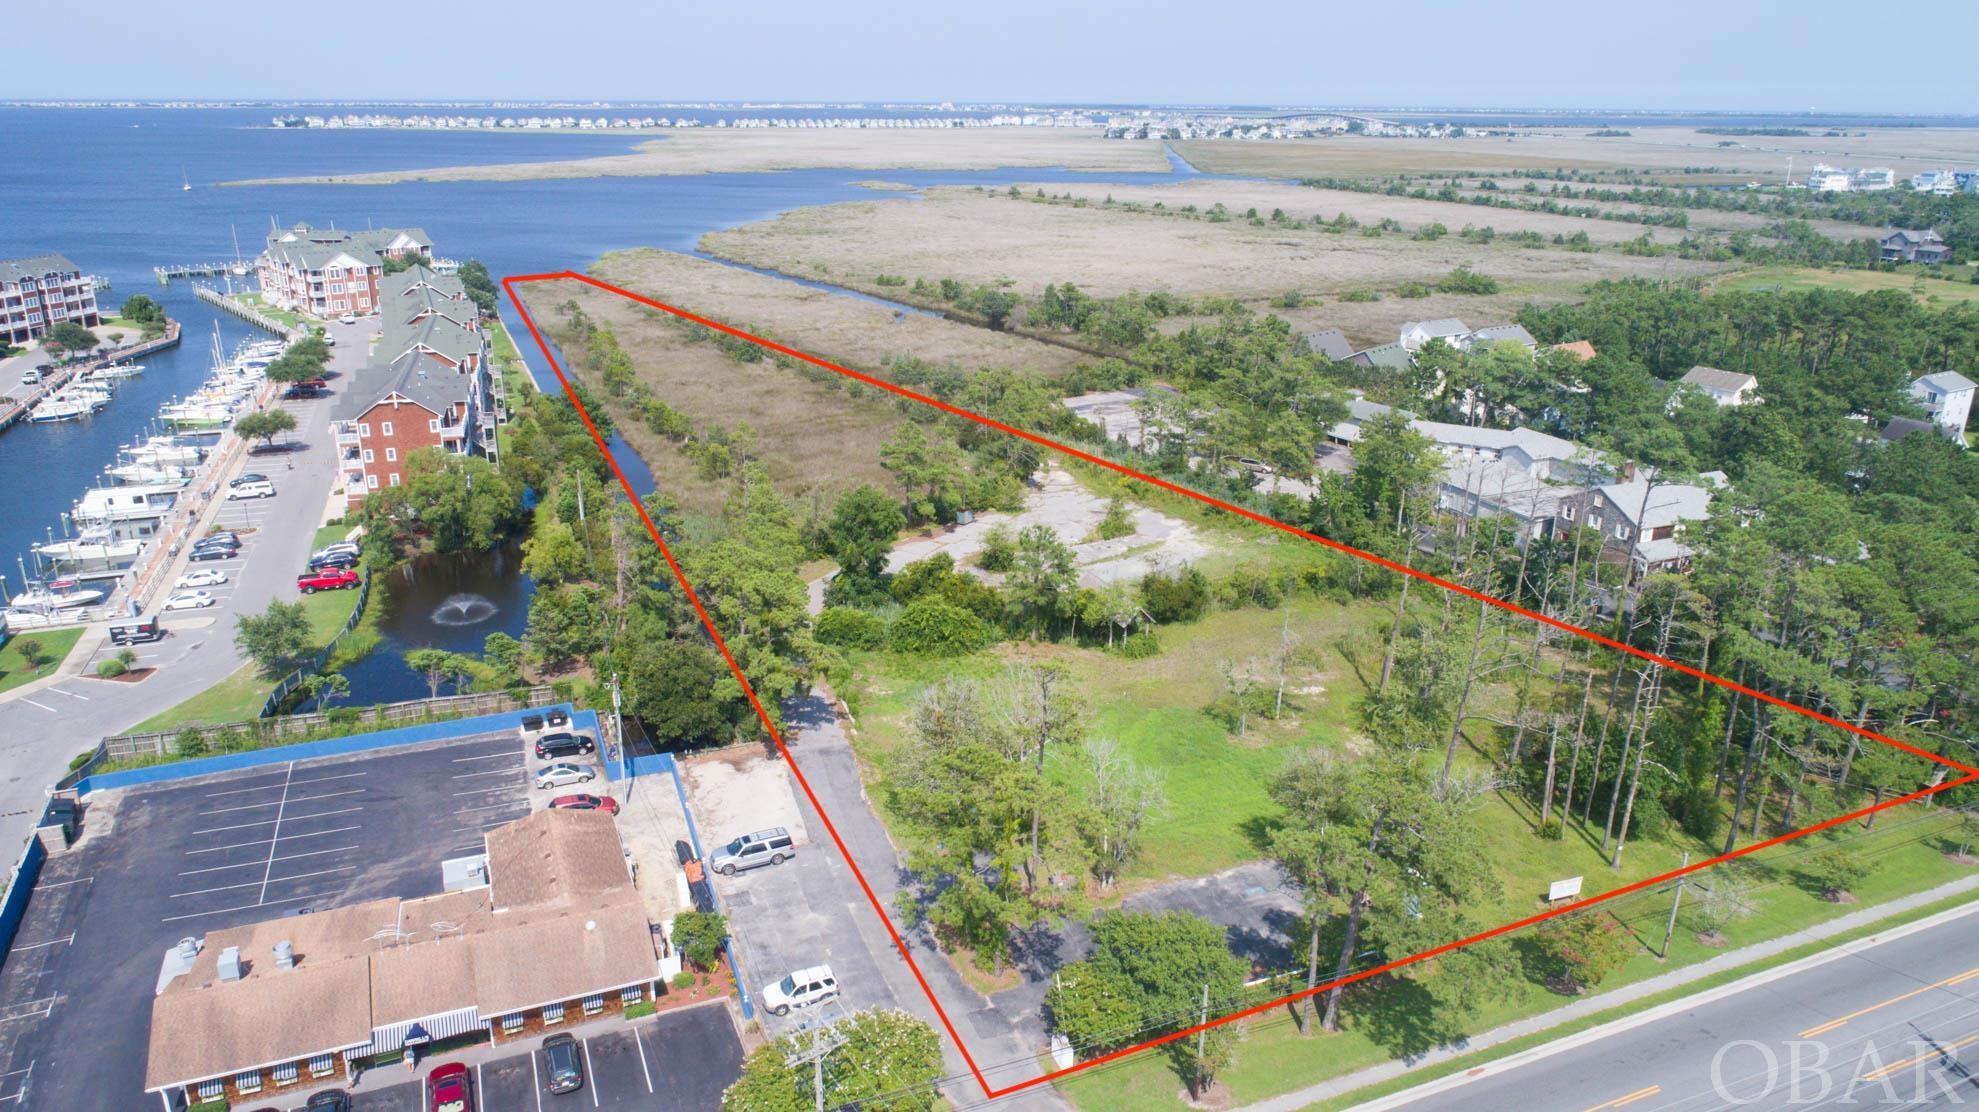 525 Highway 64/264, Manteo, NC 27954, ,Lots/land,For sale,Highway 64/264,117328